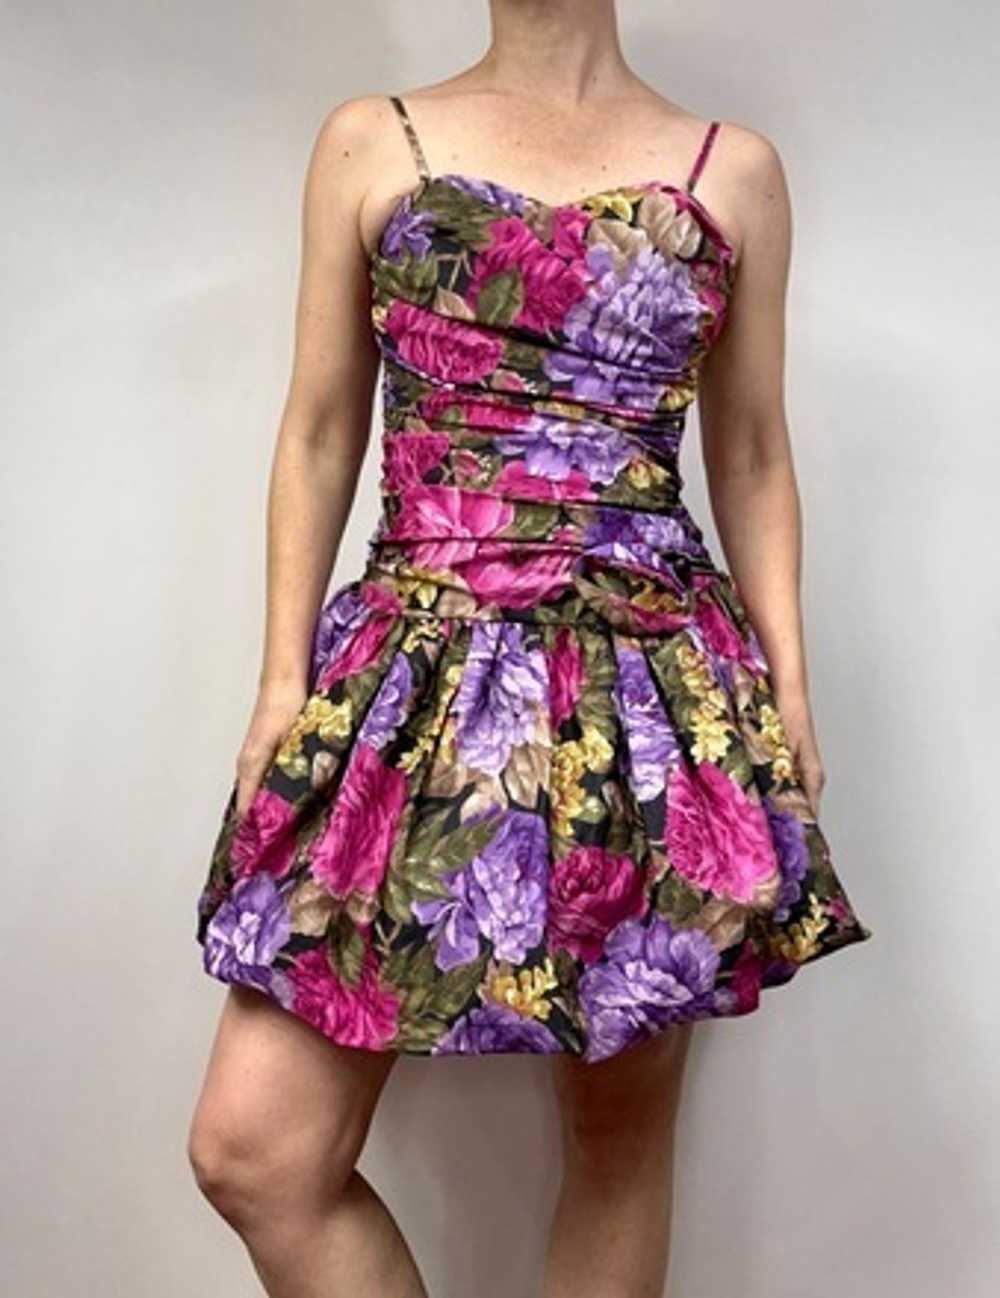 Pristine 90’s Floral Balloon Skirt Party Dress - image 3